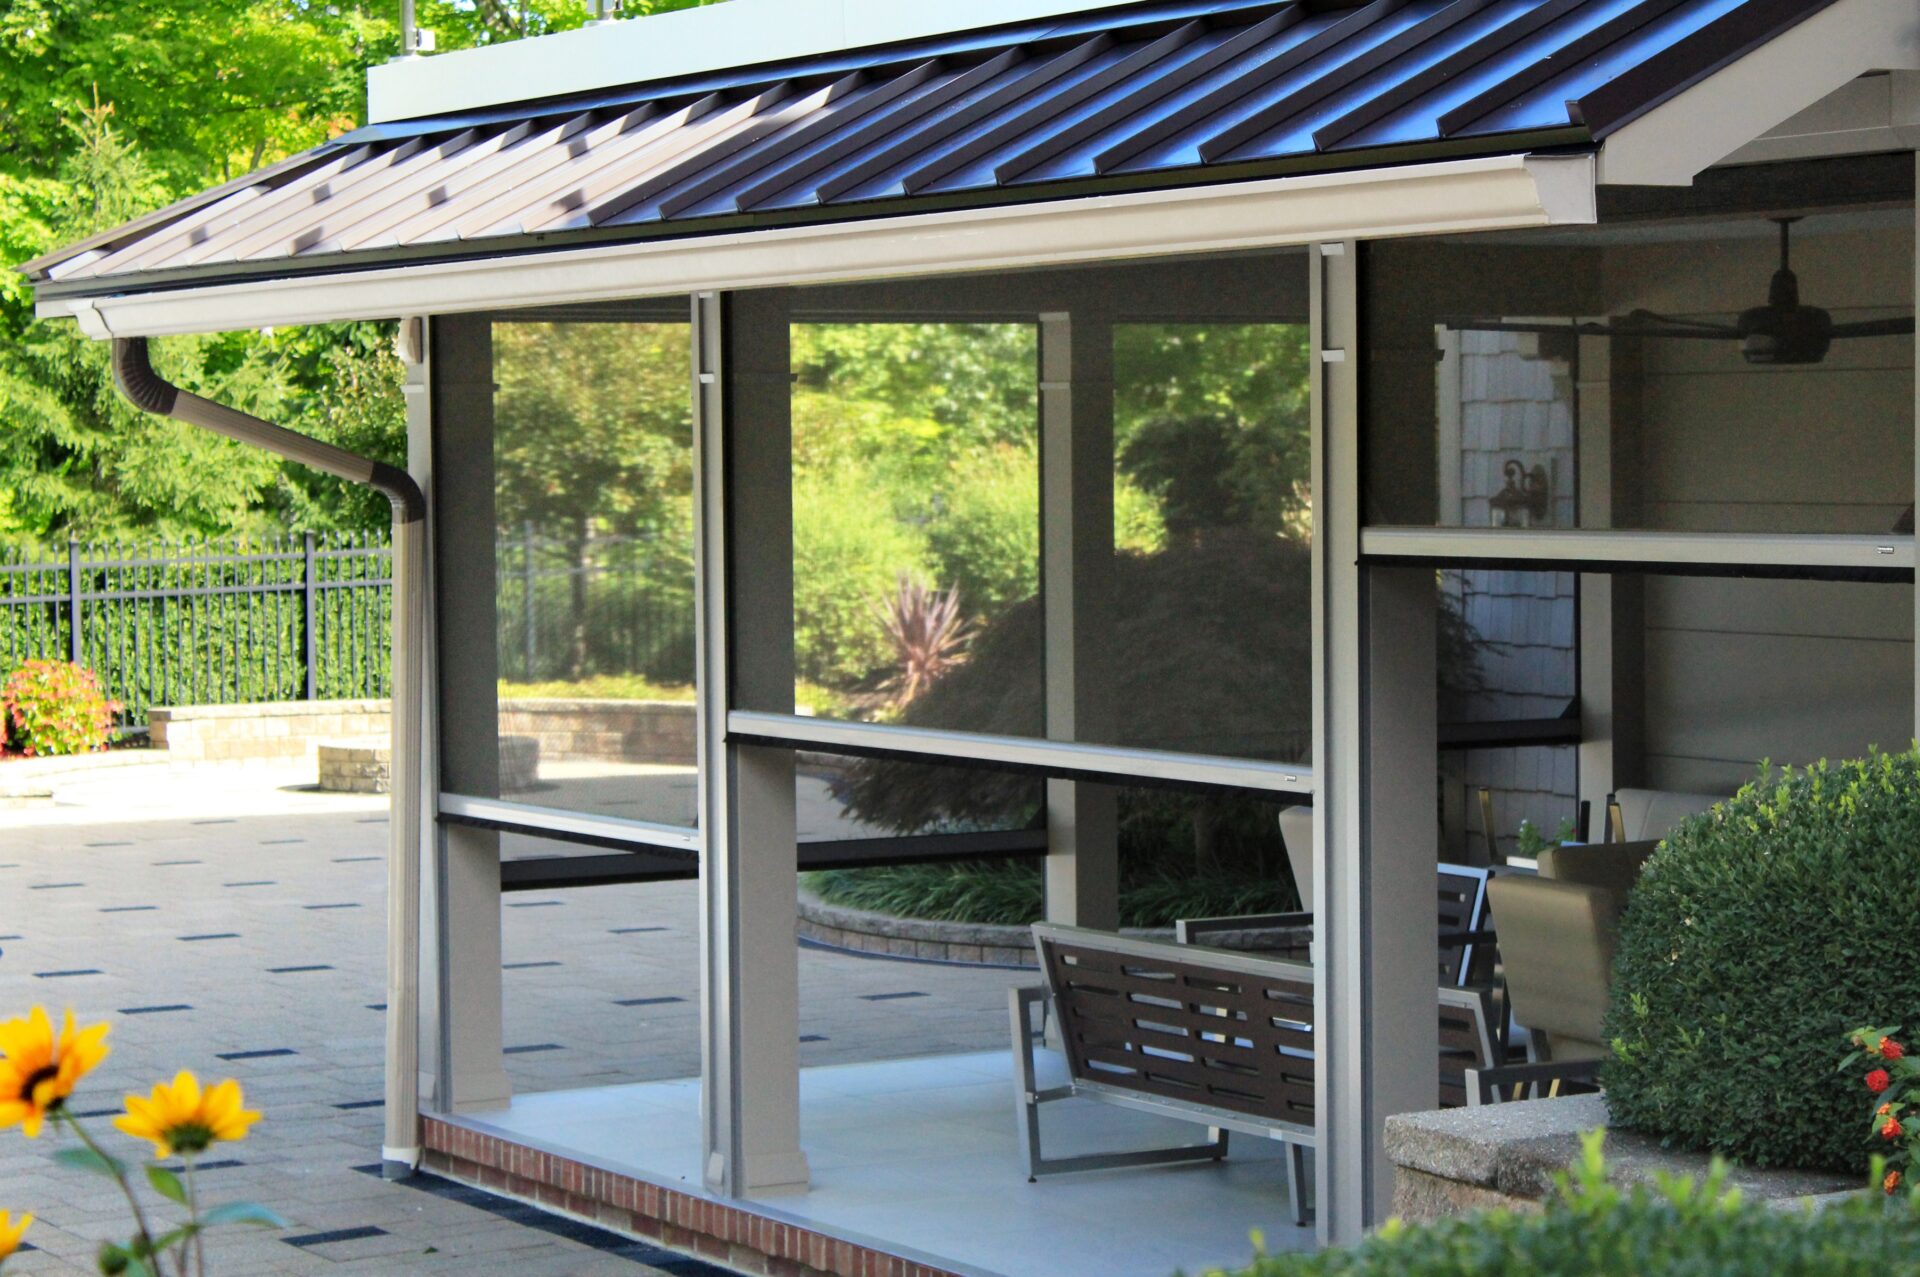 Screening Solutions Ohio transforms this outdoor patio into a screened-in porch in seconds by using Phantom Retractable Screens. These motorized screens appear at the touch of a button and retract out of sight when not in use.